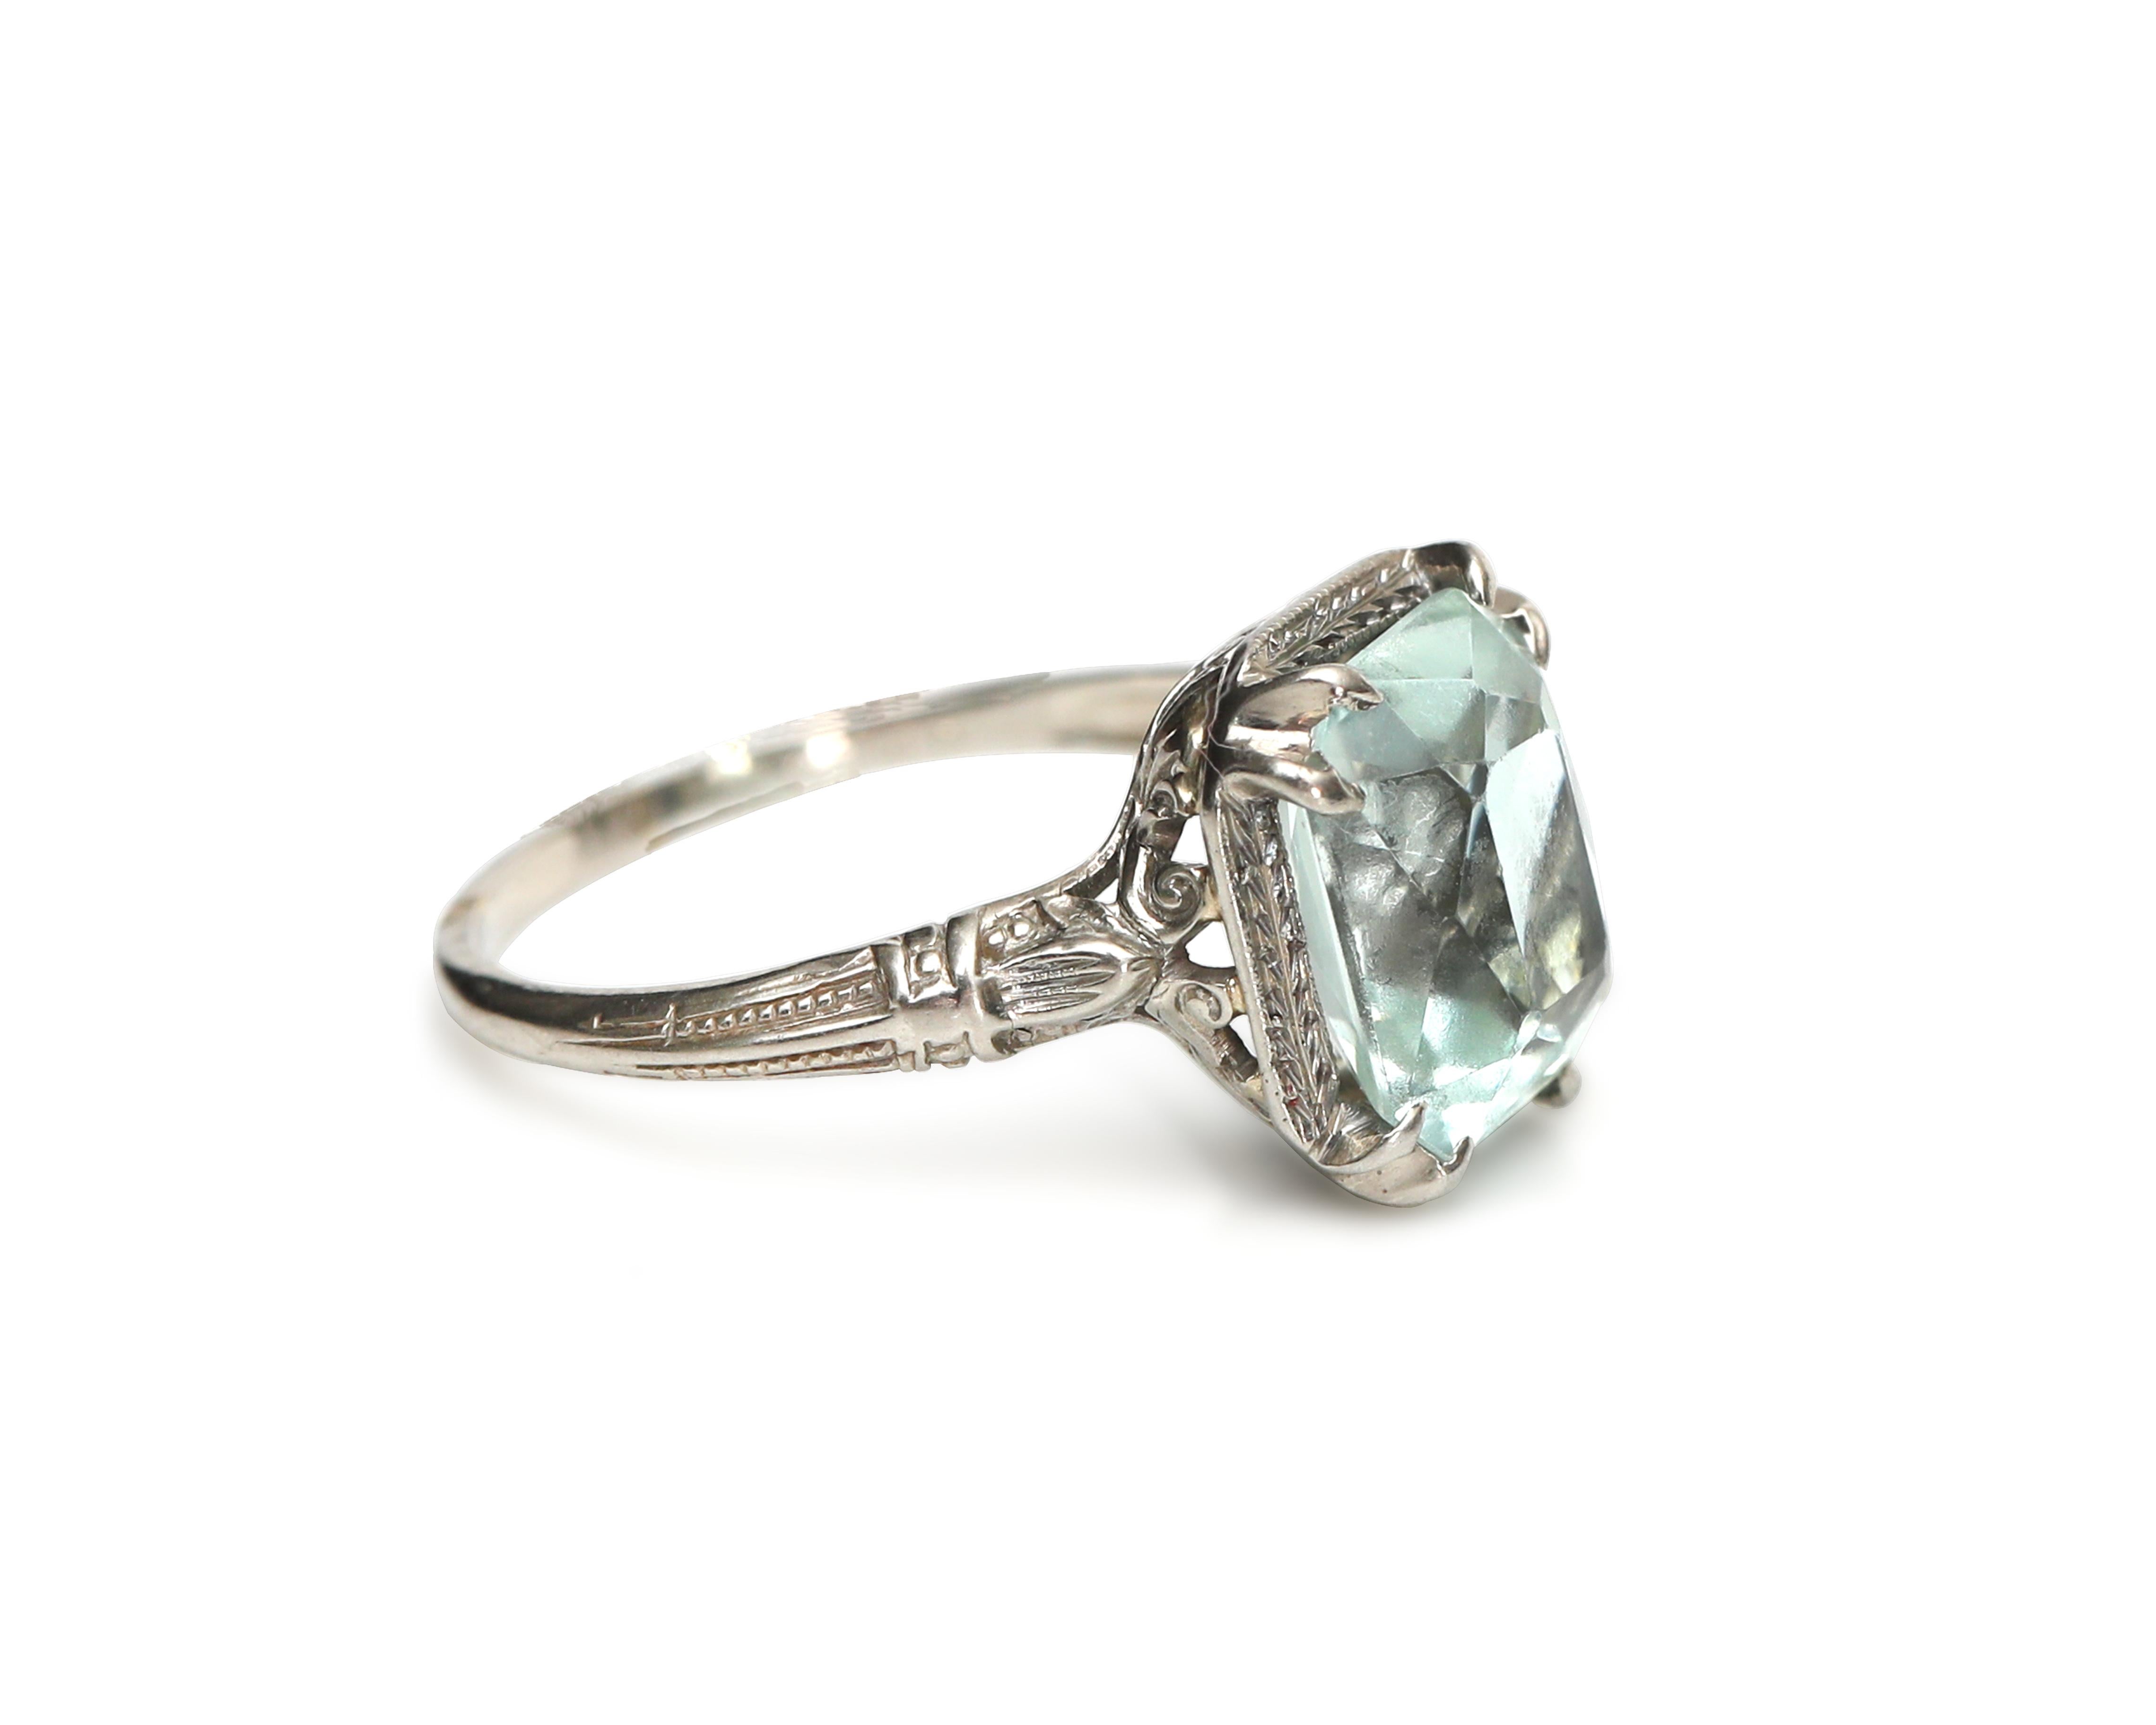 Description: 
This 1920's fashion ring is a genuine Art Deco beauty! The 18K white gold band showcases intricate work around the shoulders of the ring and features a transparent blue/green 4.2 Carat Aquamarine. The lovely gem is held by 4 double